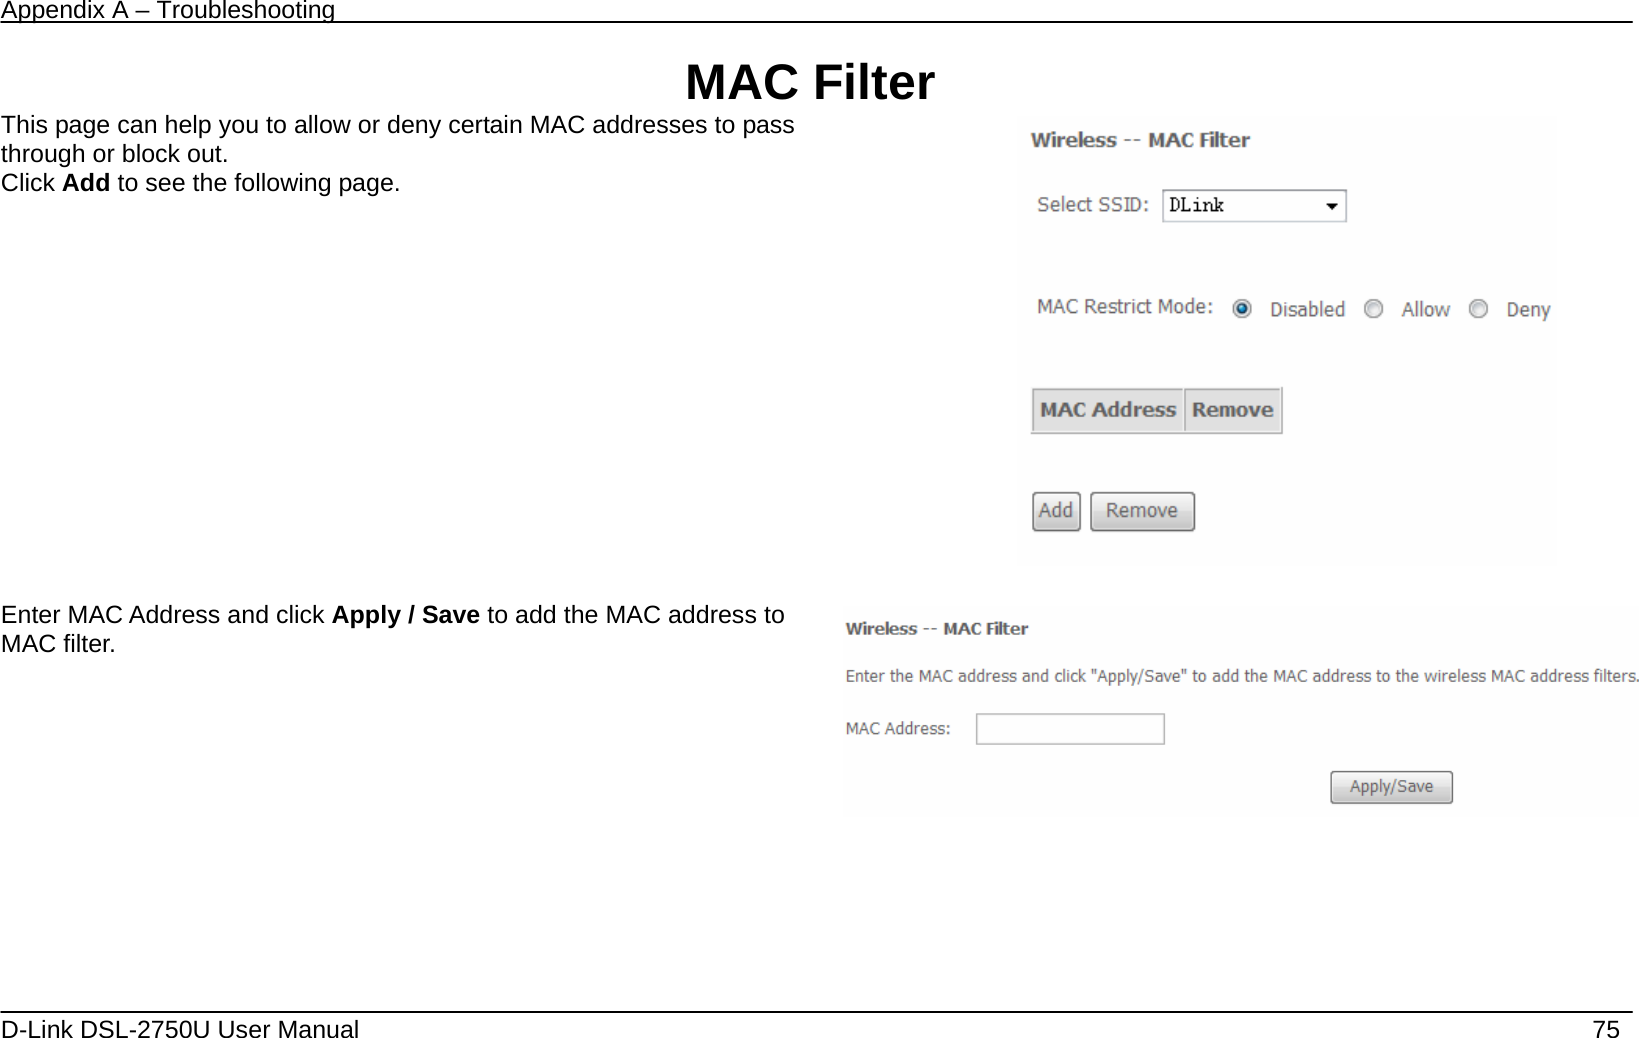 Appendix A – Troubleshooting   D-Link DSL-2750U User Manual    75 MAC Filter This page can help you to allow or deny certain MAC addresses to pass through or block out. Click Add to see the following page.    Enter MAC Address and click Apply / Save to add the MAC address to MAC filter.       